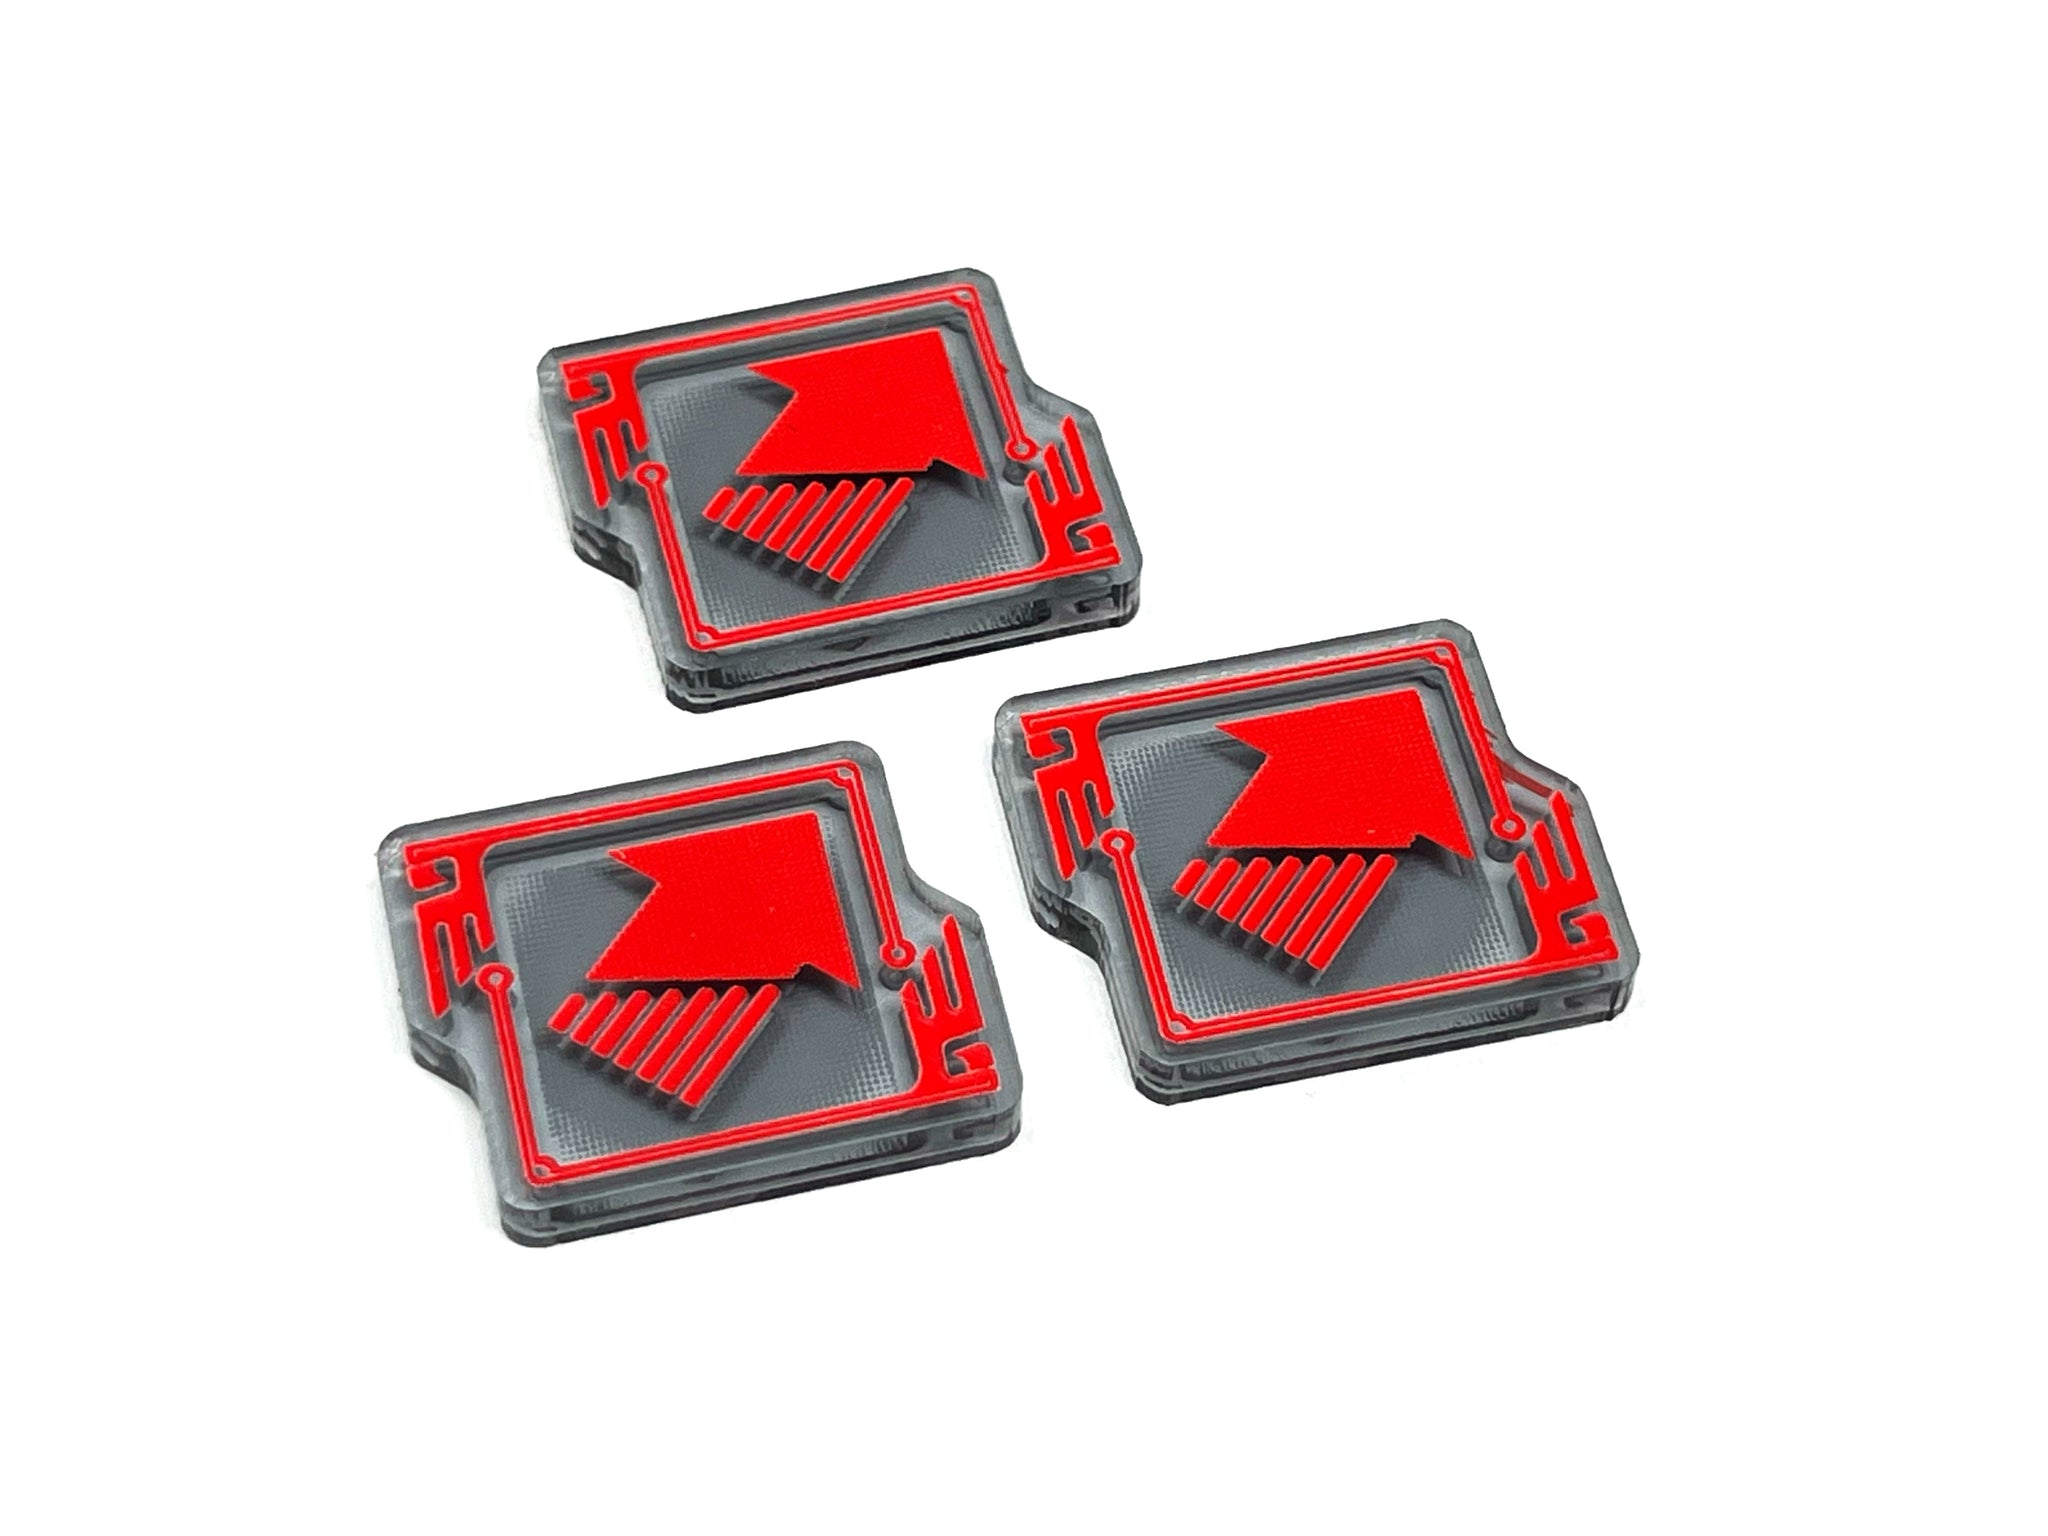 Movement - Phase ability Token Set for Warhammer 40k 10th Edition